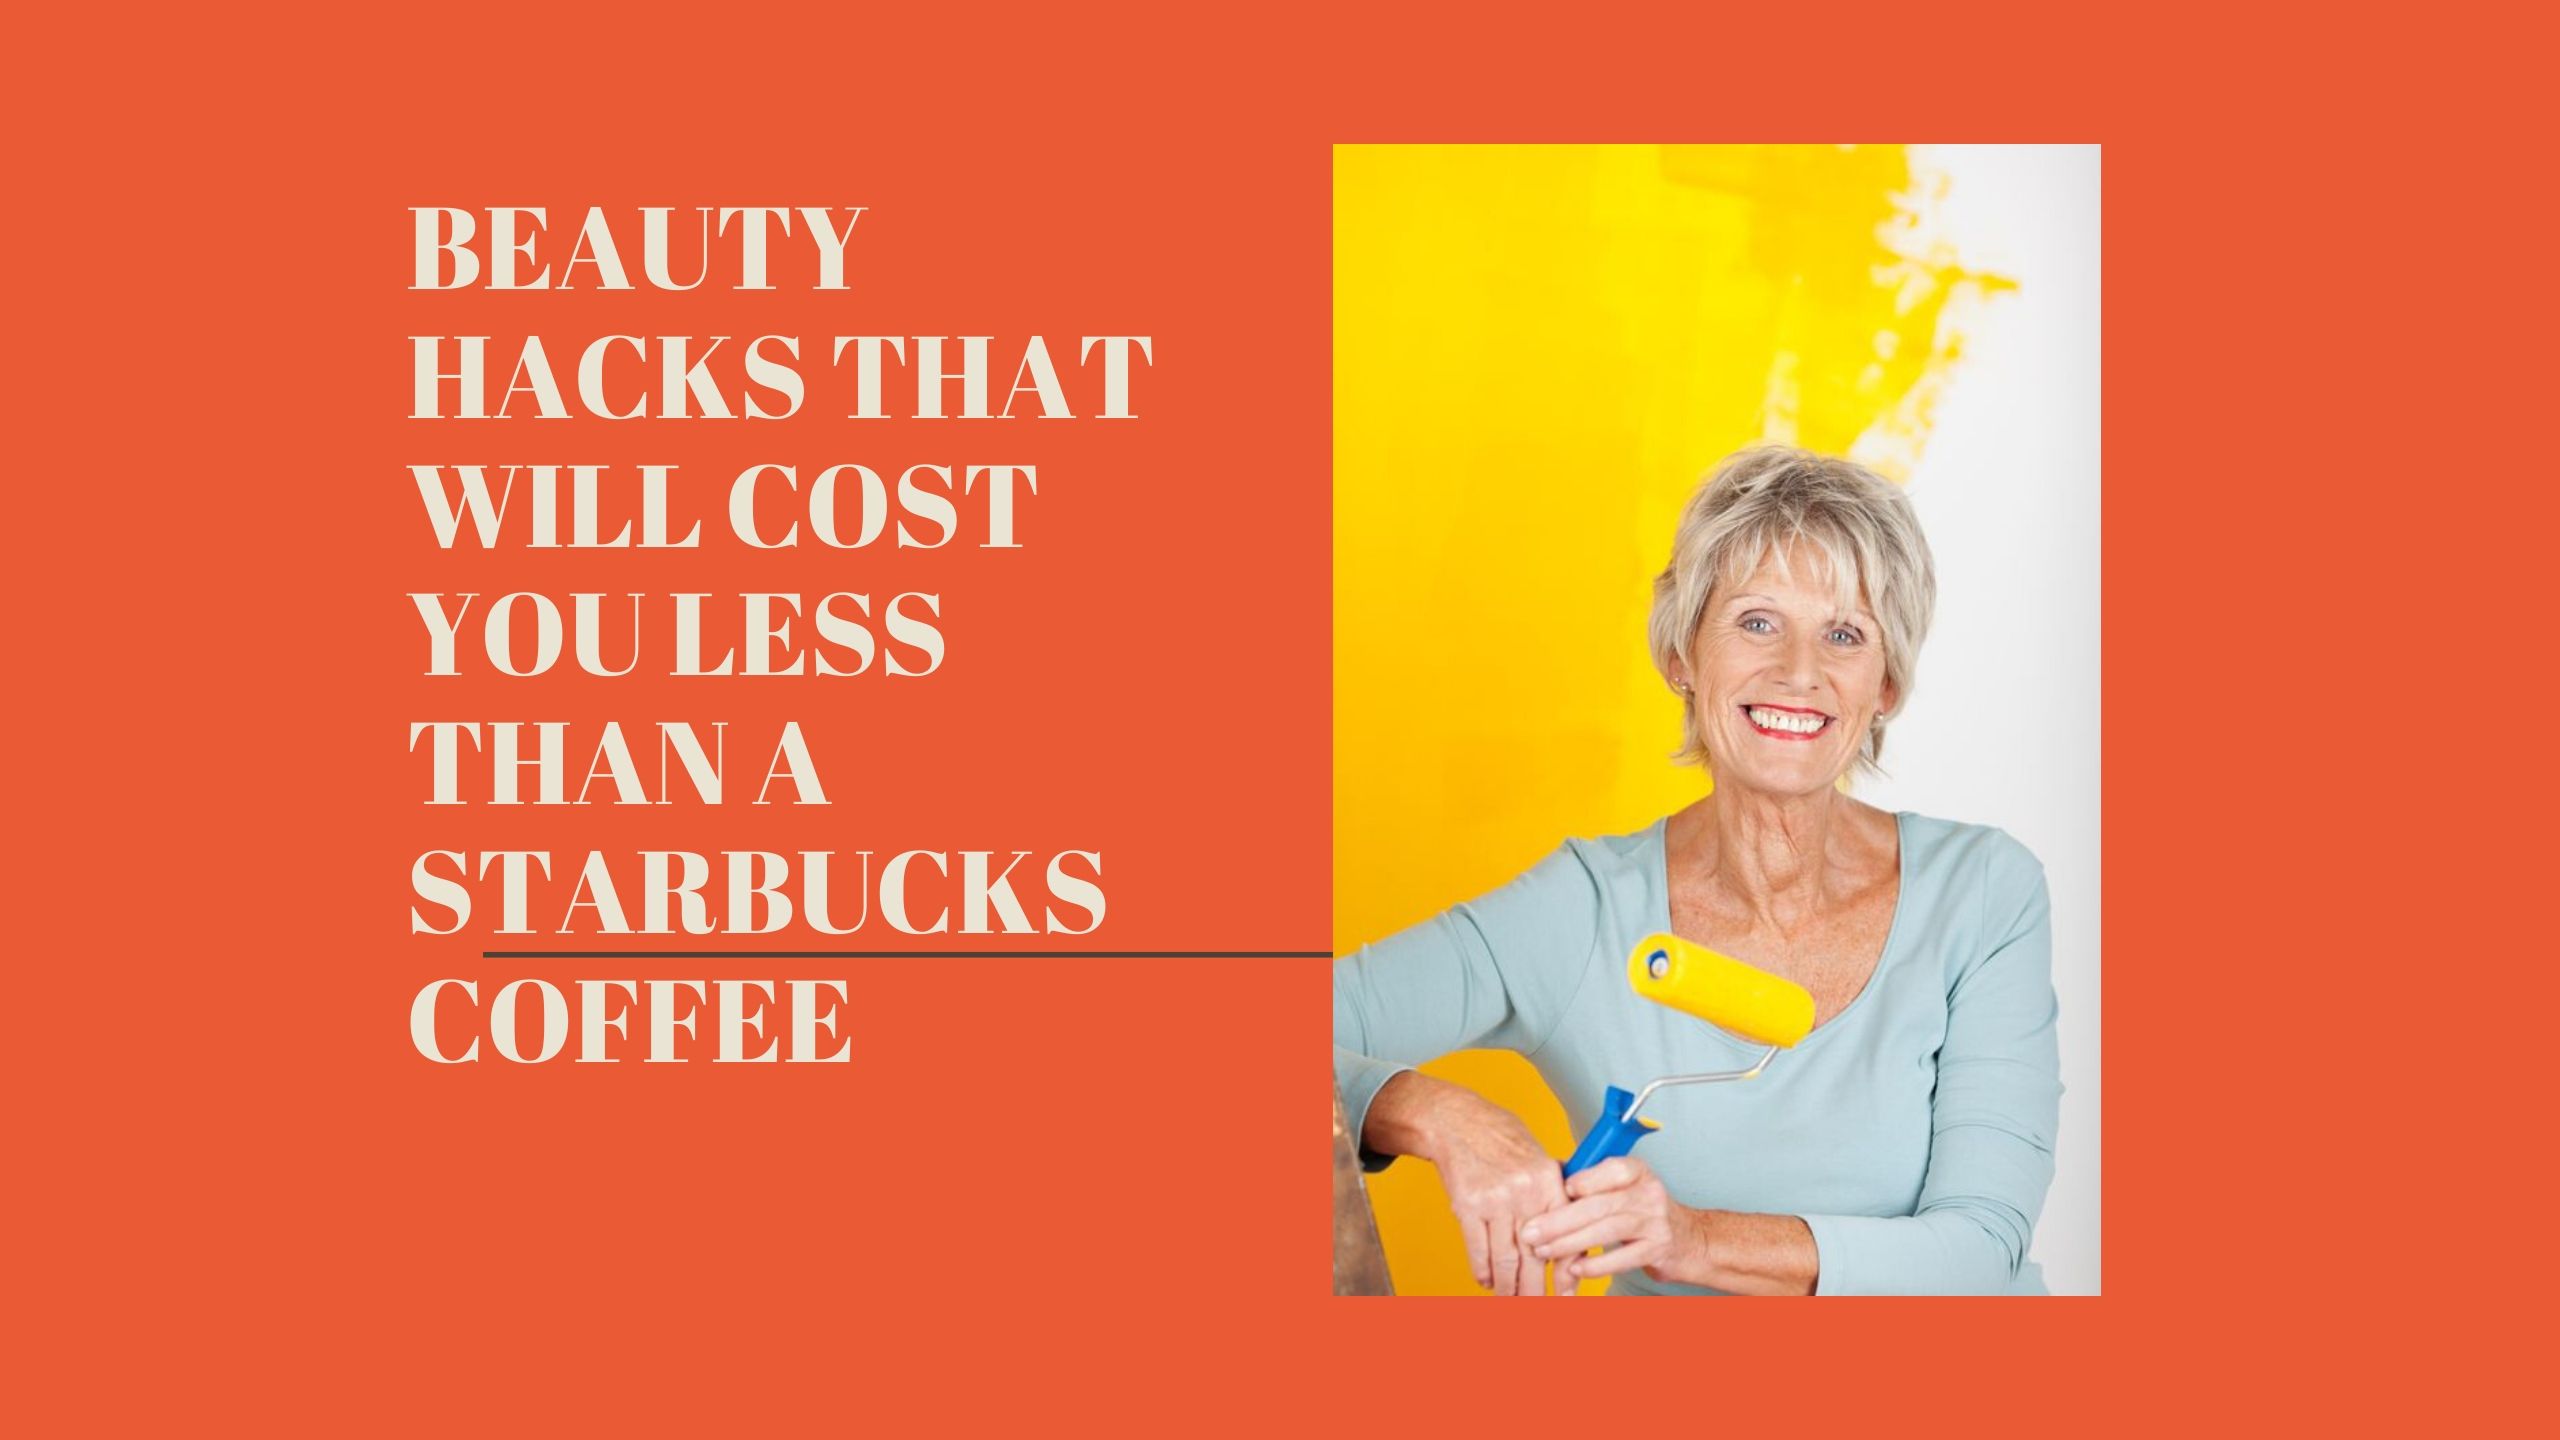 Beauty Hacks That Will Cost You Less Than A Starbucks Coffee